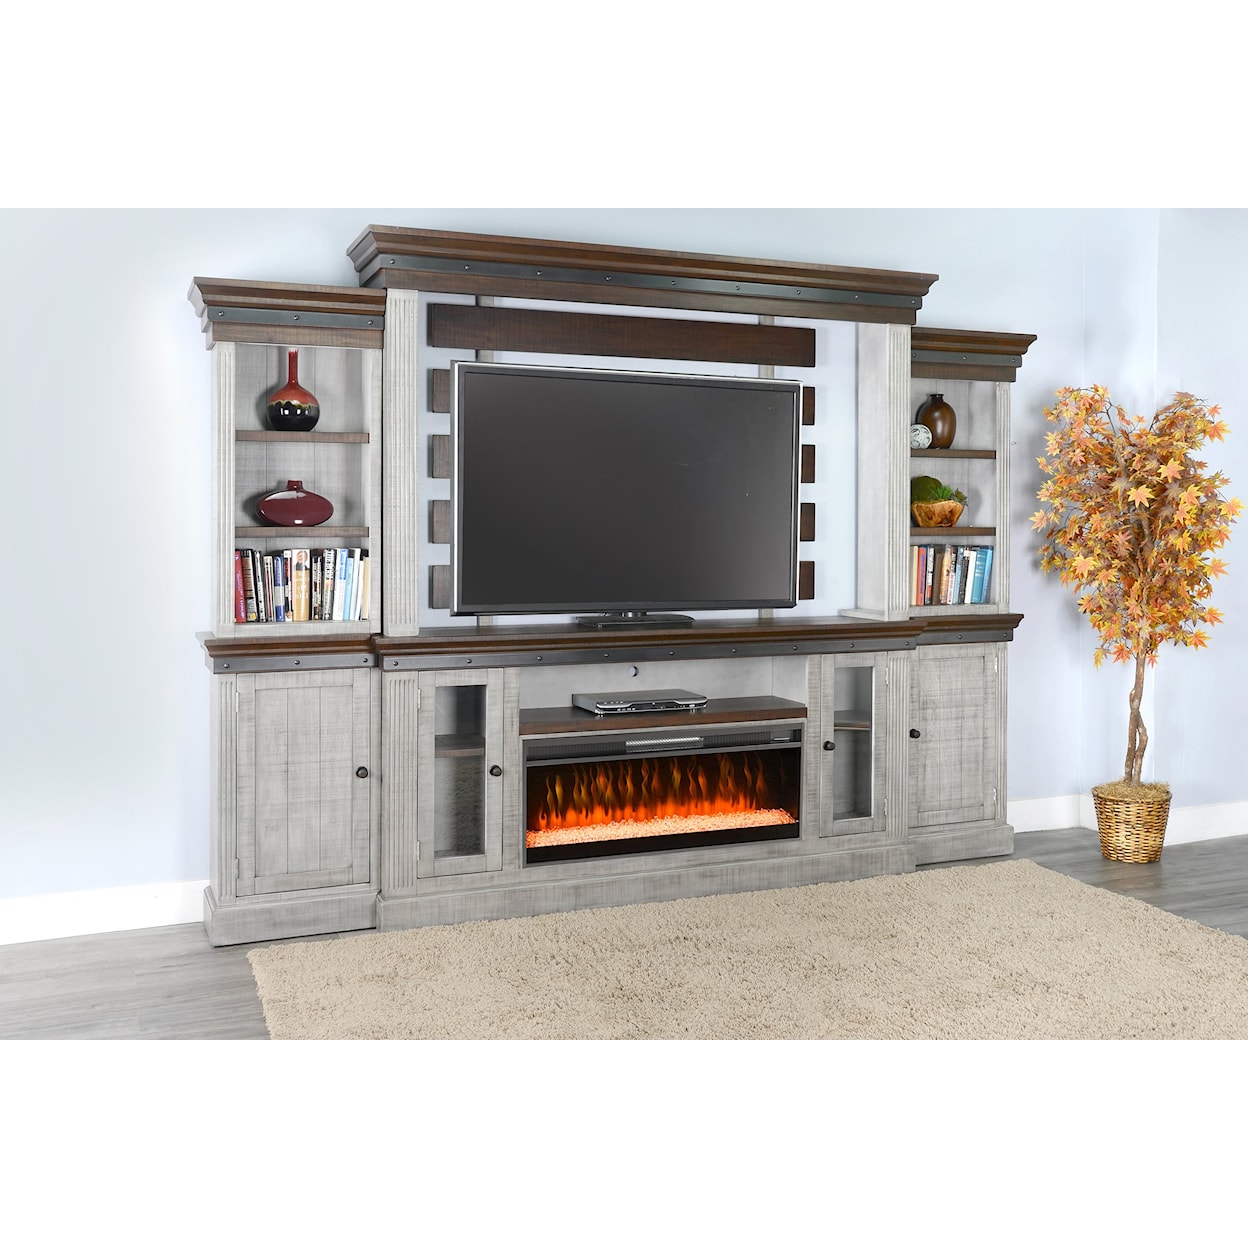 Sunny Designs 3649 Entertainment Wall with Fireplace Insert